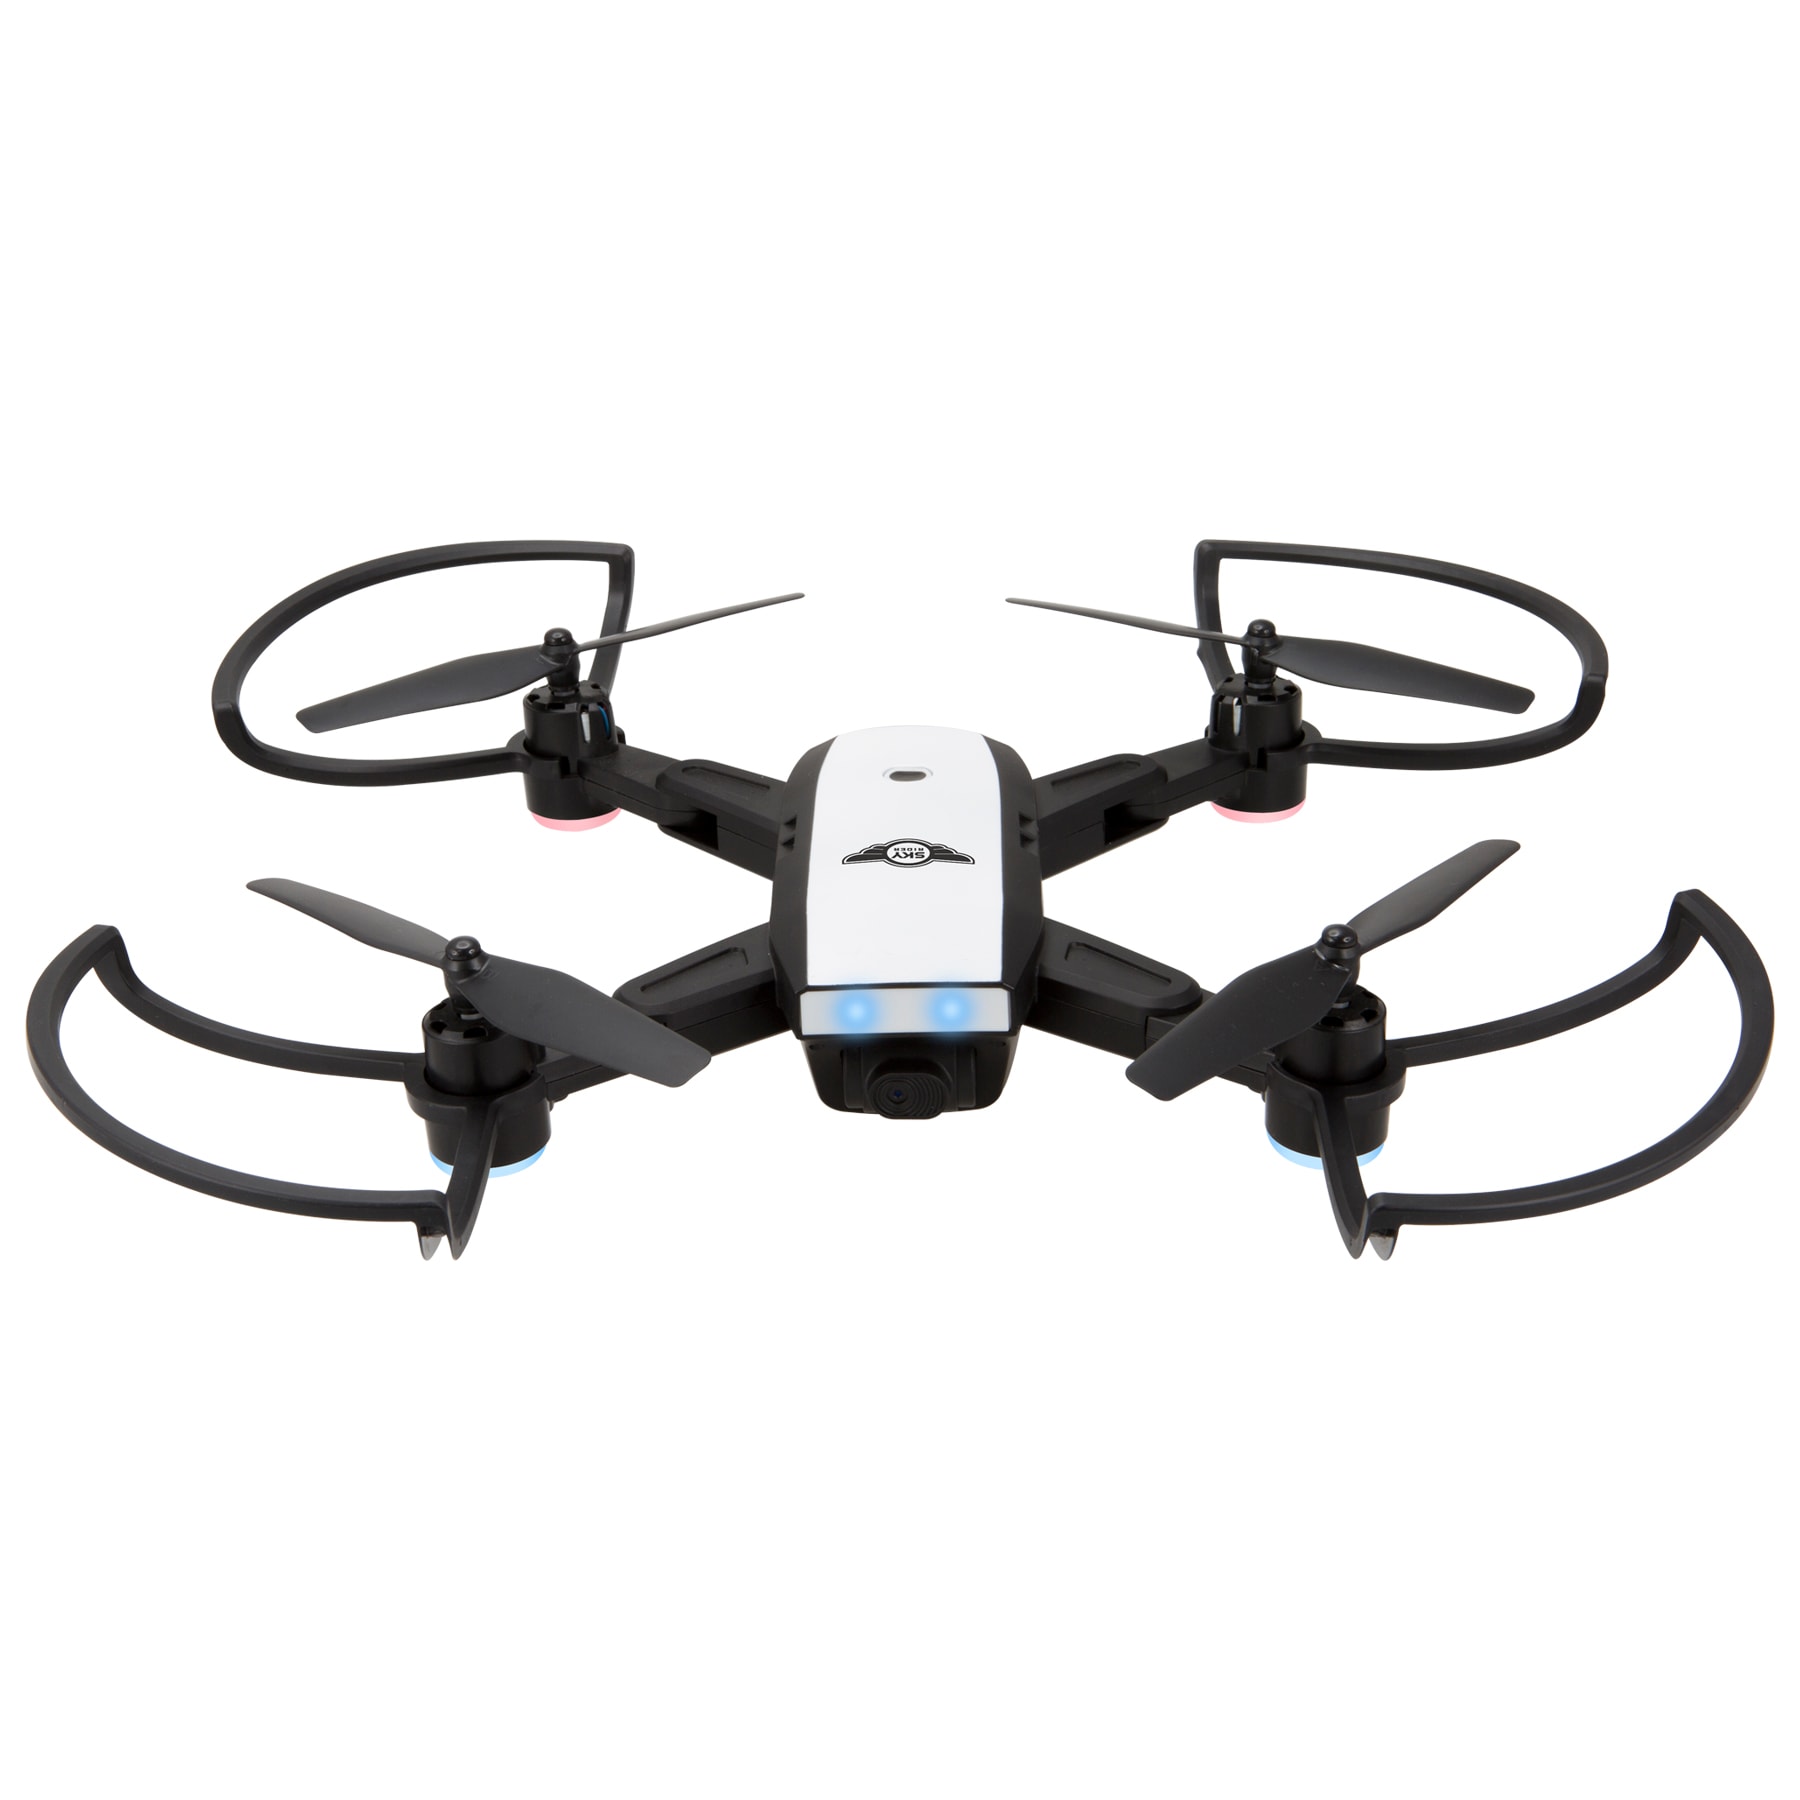 Raven 2 Foldable Drone with Wi-Fi Camera and GPS, Black | - Sky Rider DRWG530B